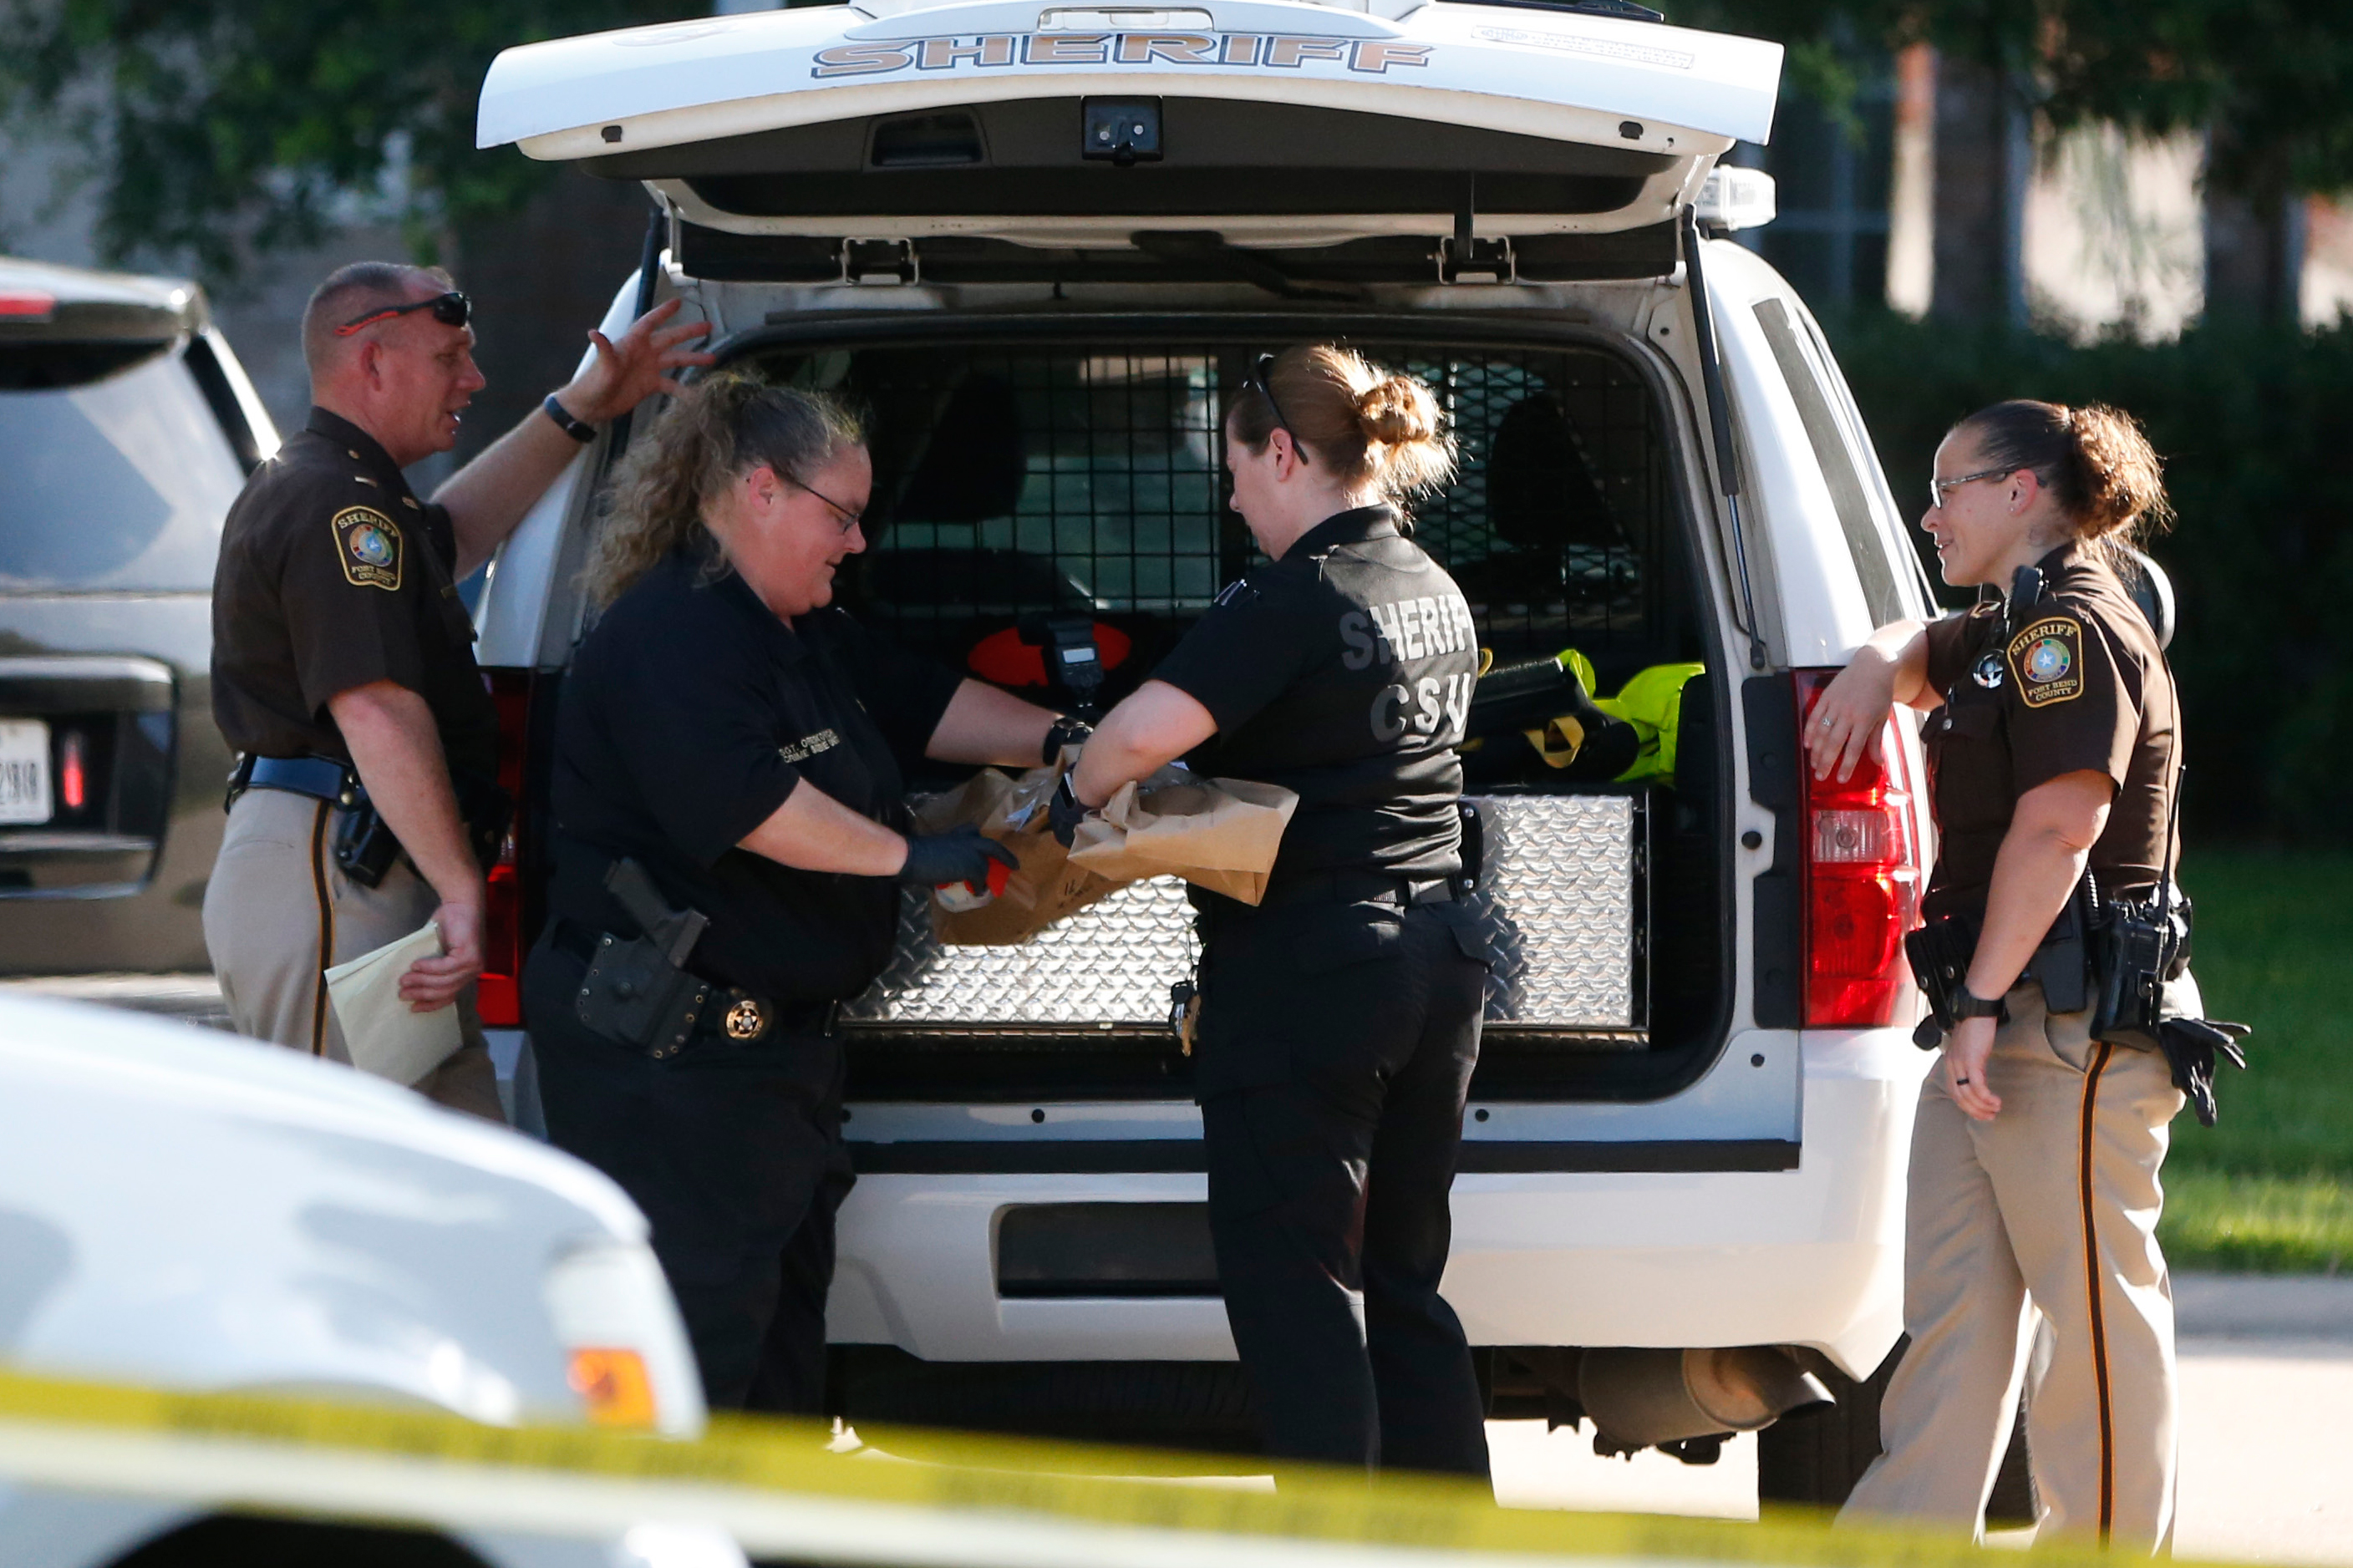 Fort Bend County Sheriffs department crime scene members bag a gun for evidence in a shooting at Blanchard Grove and Remson Hollow in Katy, Texas on June 24, 2016. (Karen Warren—Houston Chronicle/AP)